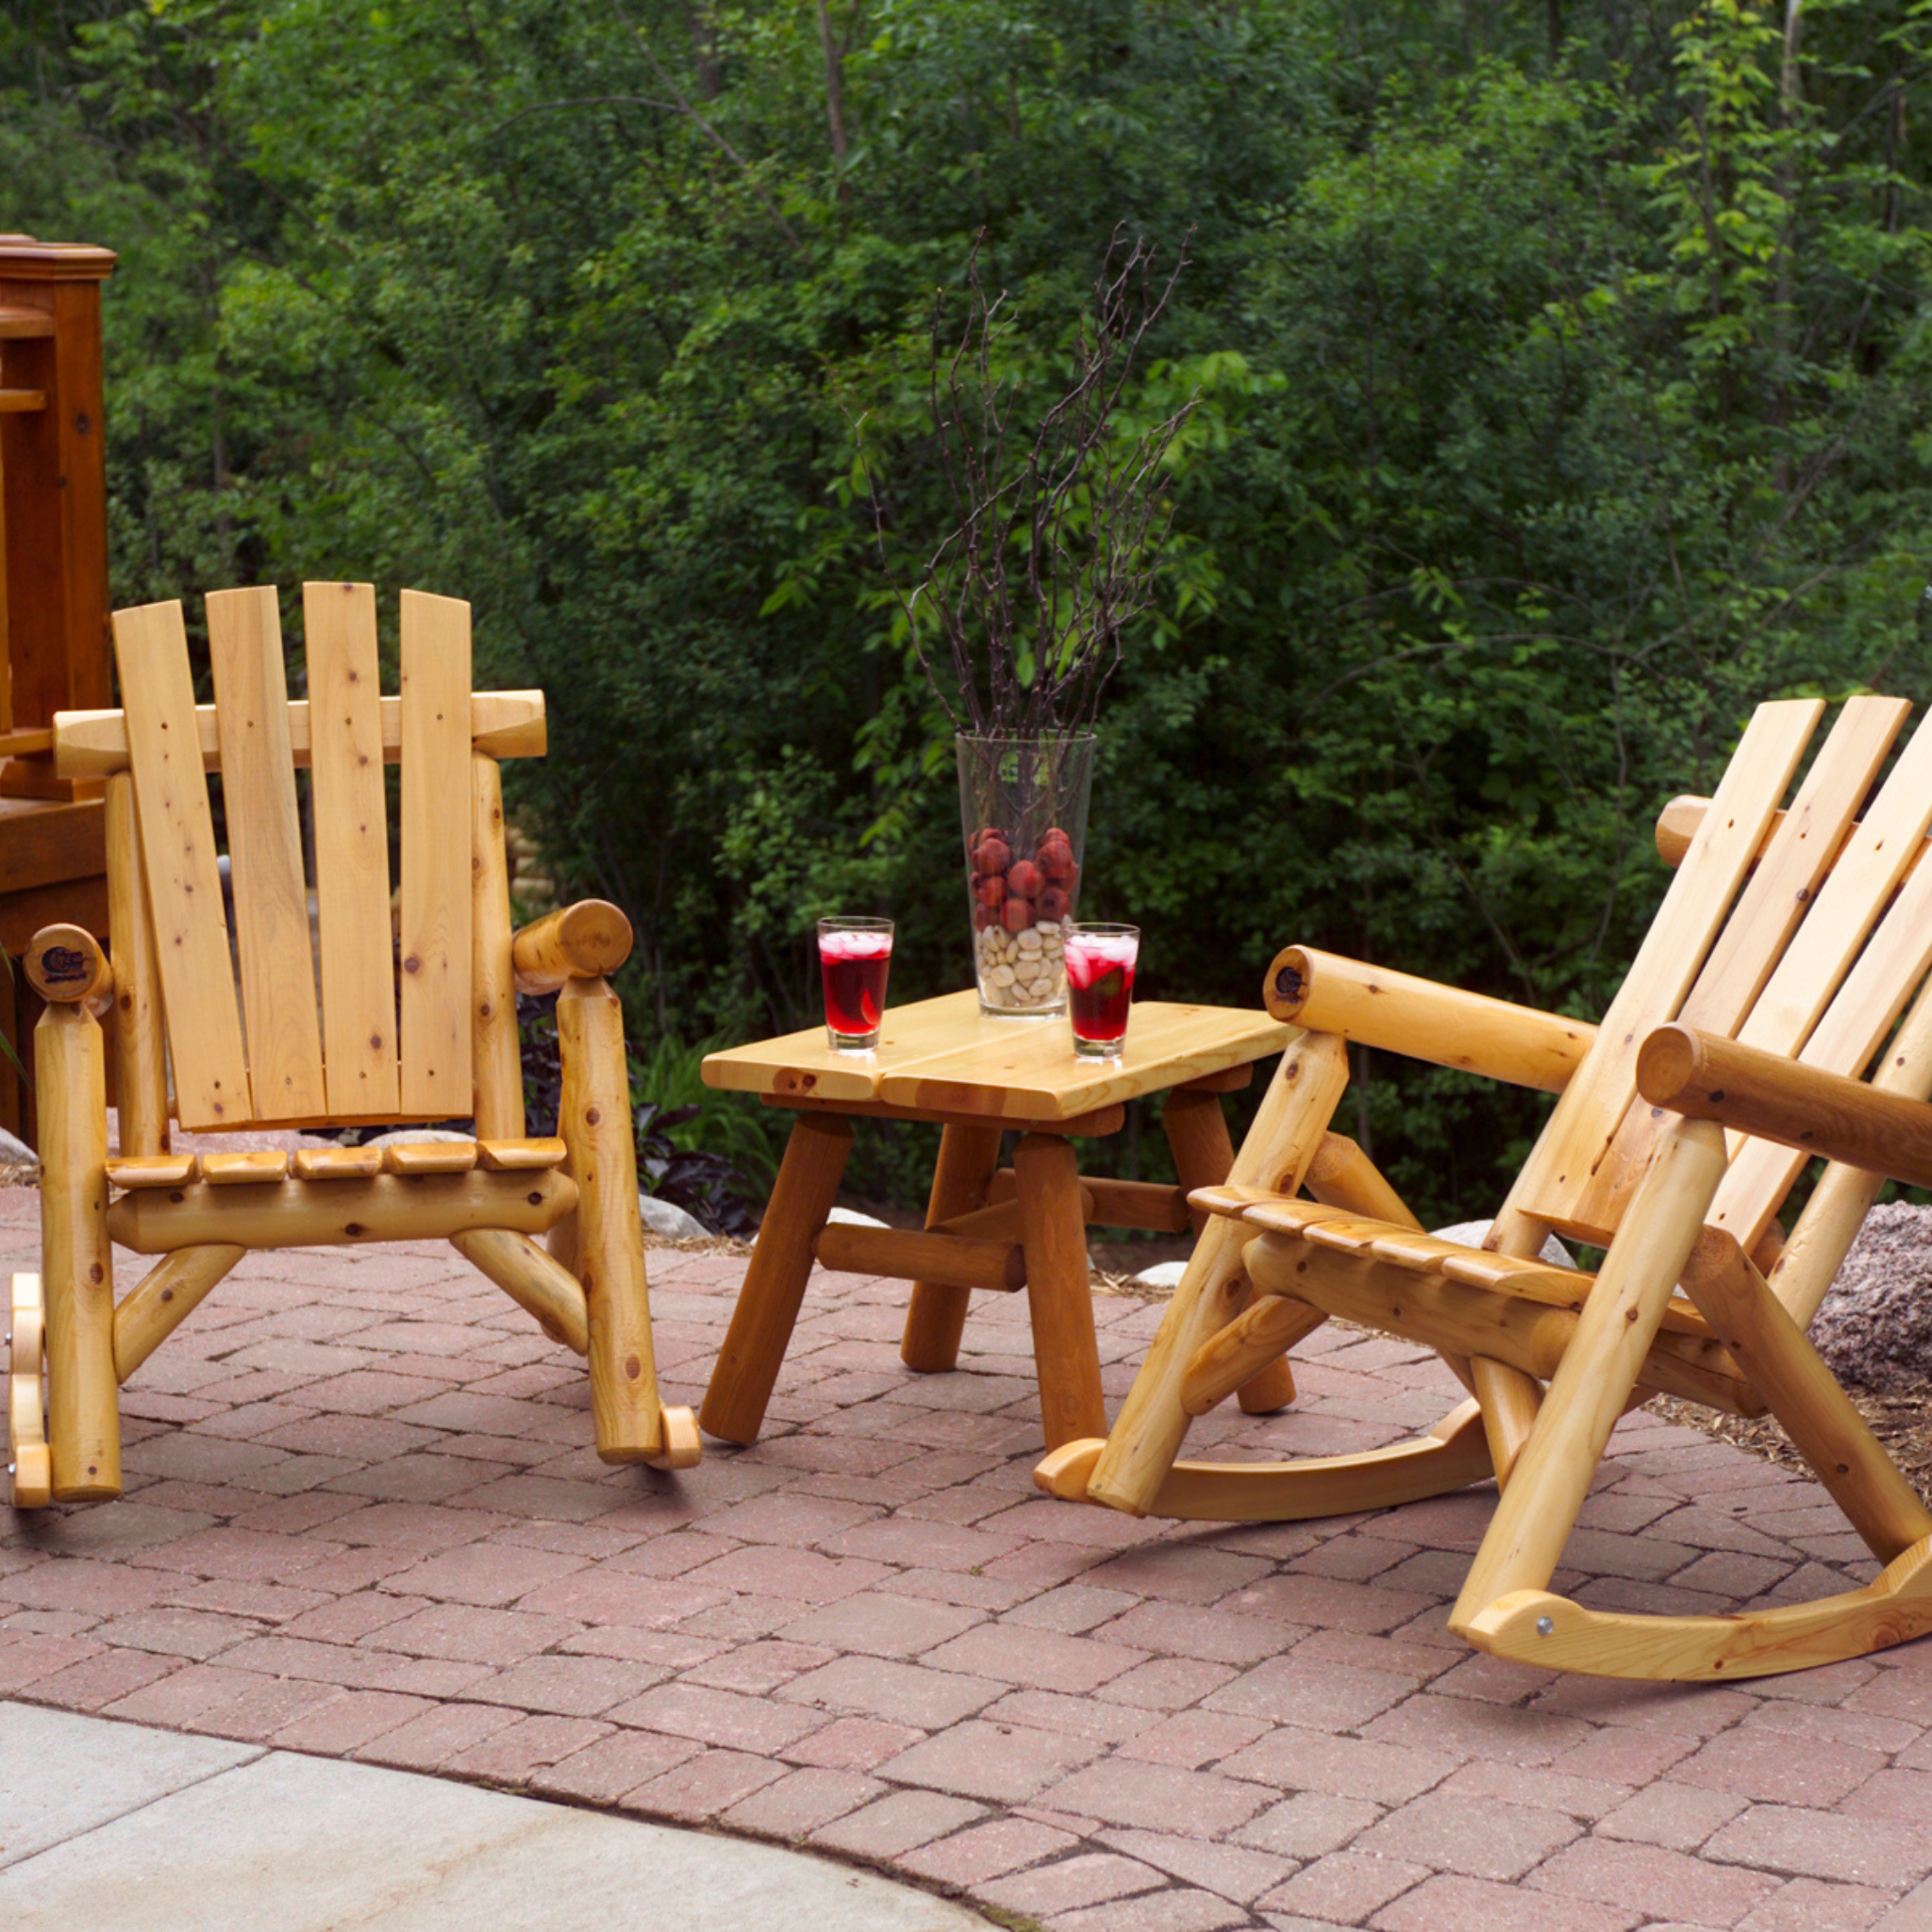 Moon Valley Rustic Outdoor Rocking Chair Set with End Table